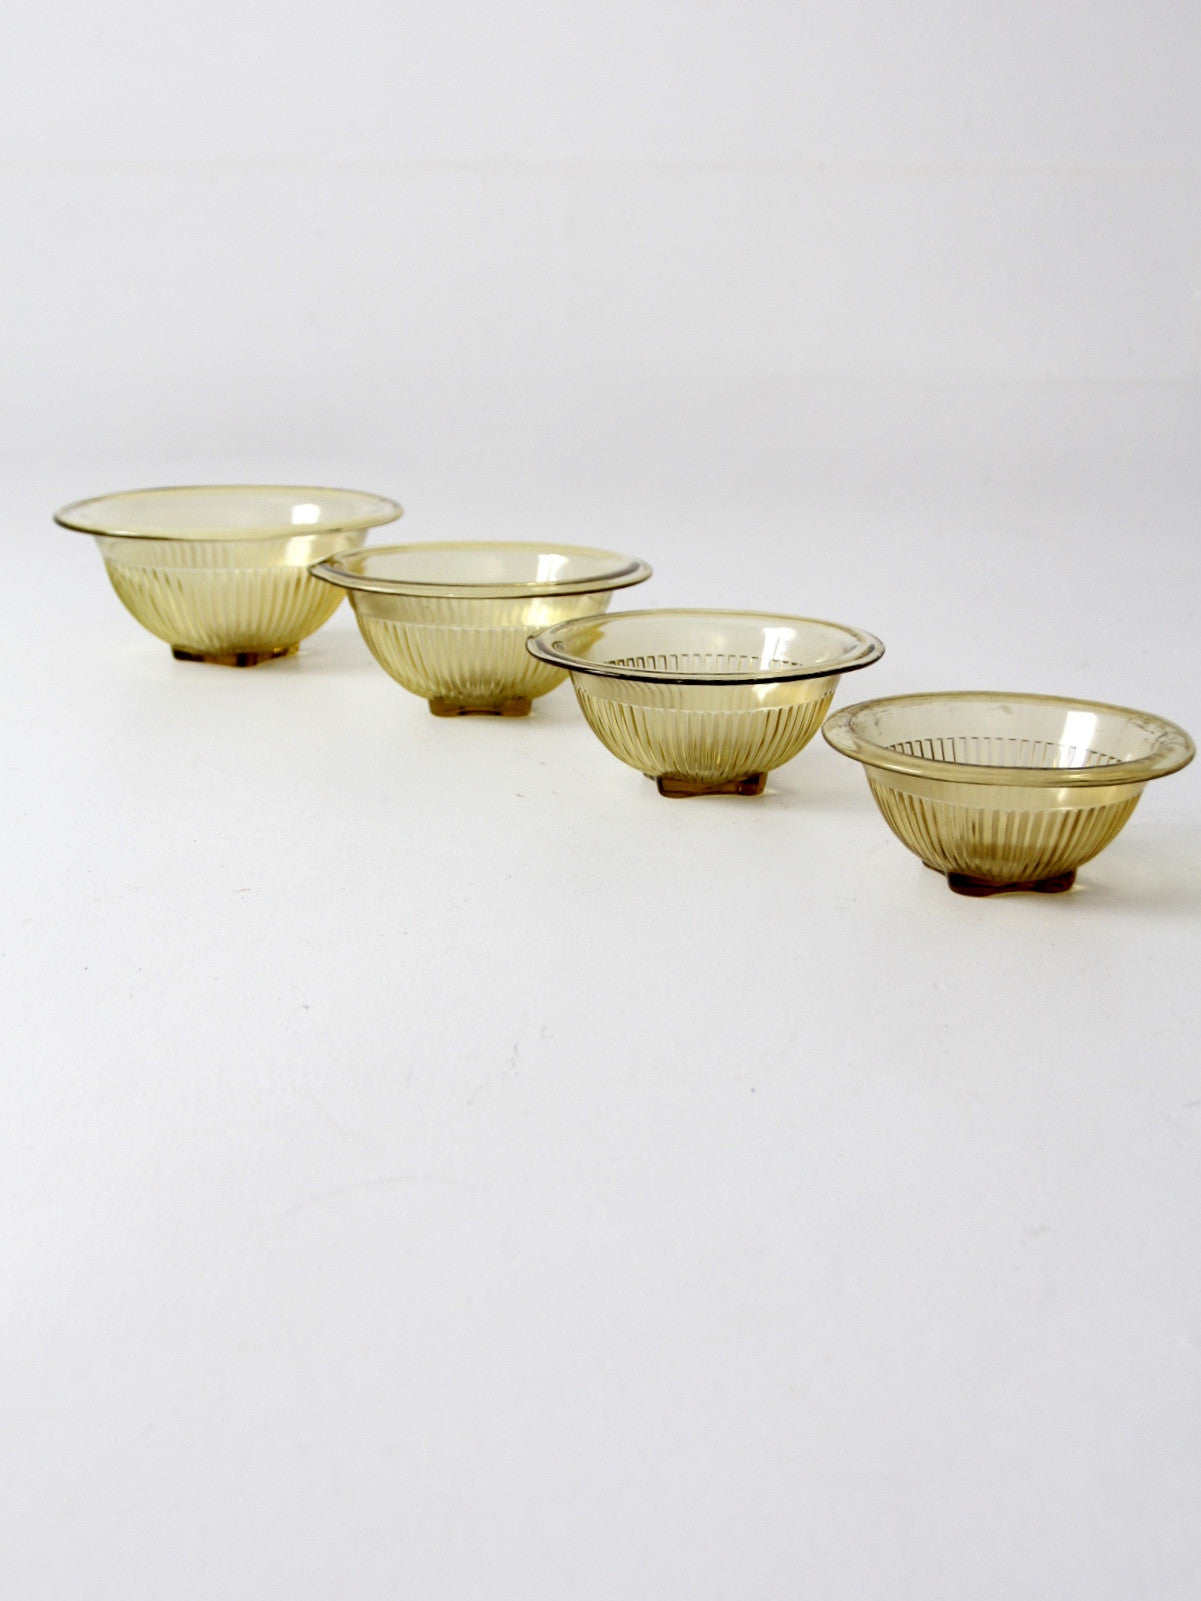 Federal Oven Ware Milk Glass Nesting Mixing Bowls - Set of 4